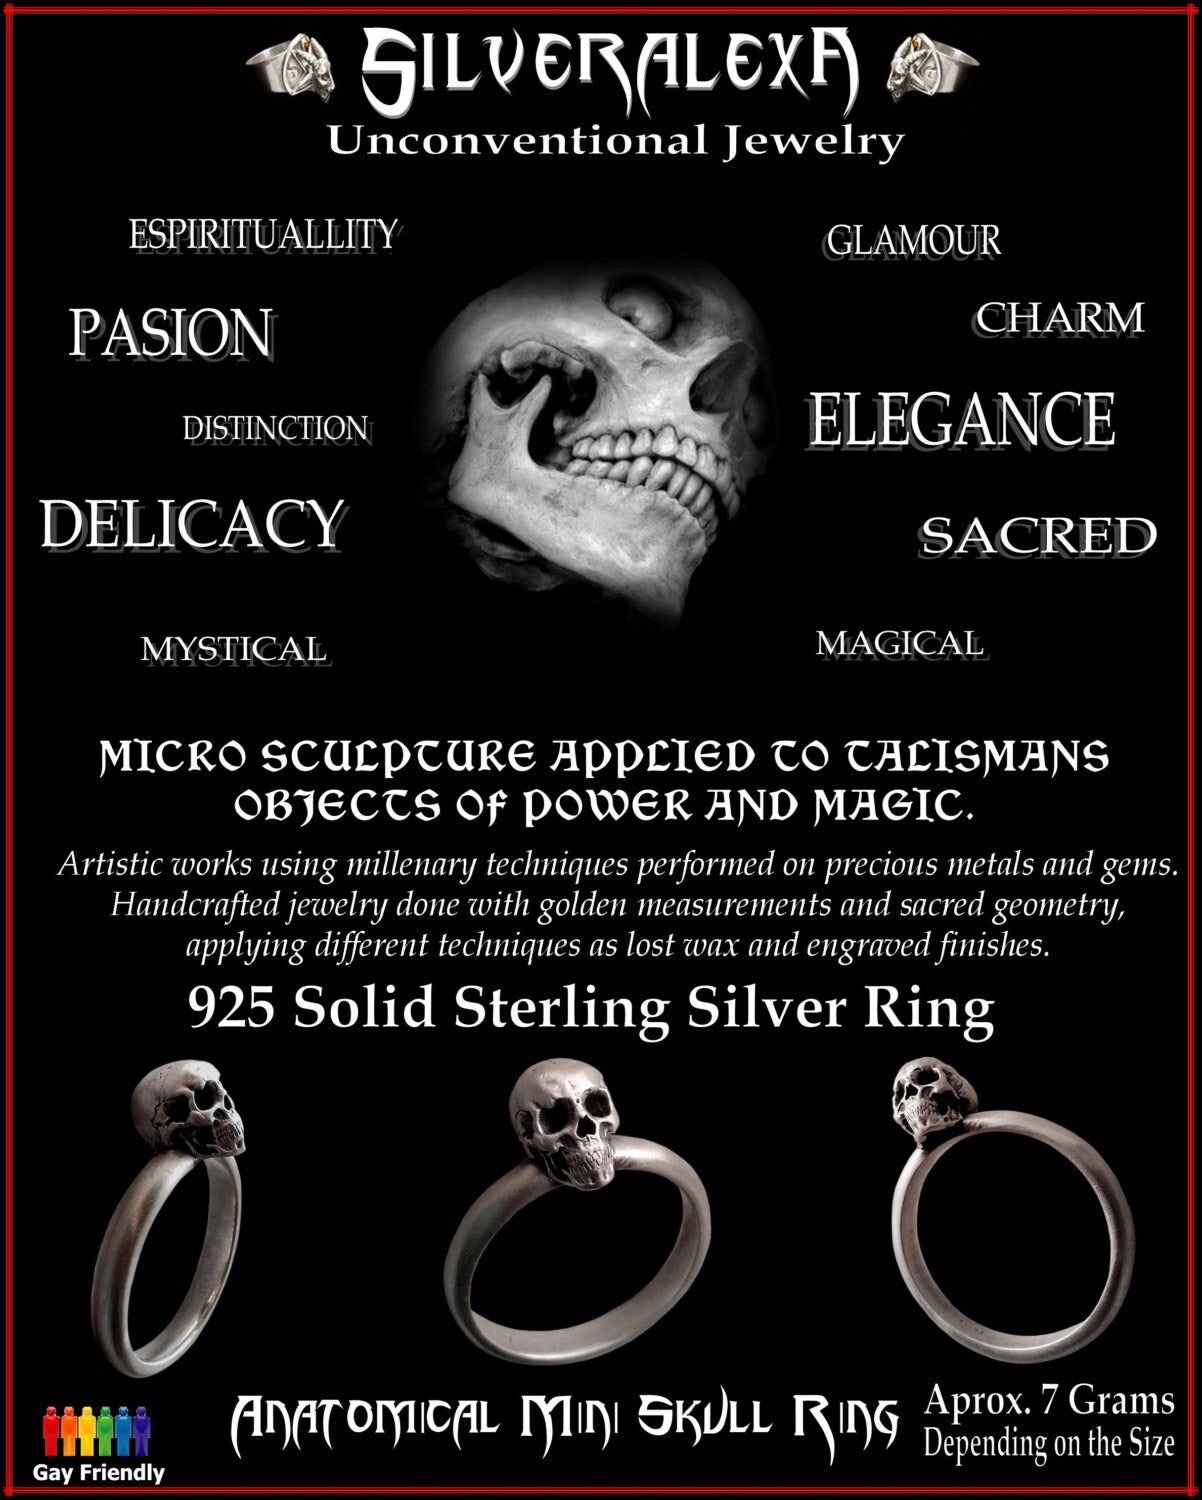 Skull ring - Sterling silver Mini Engagement Skull ring band - All Sizes availables